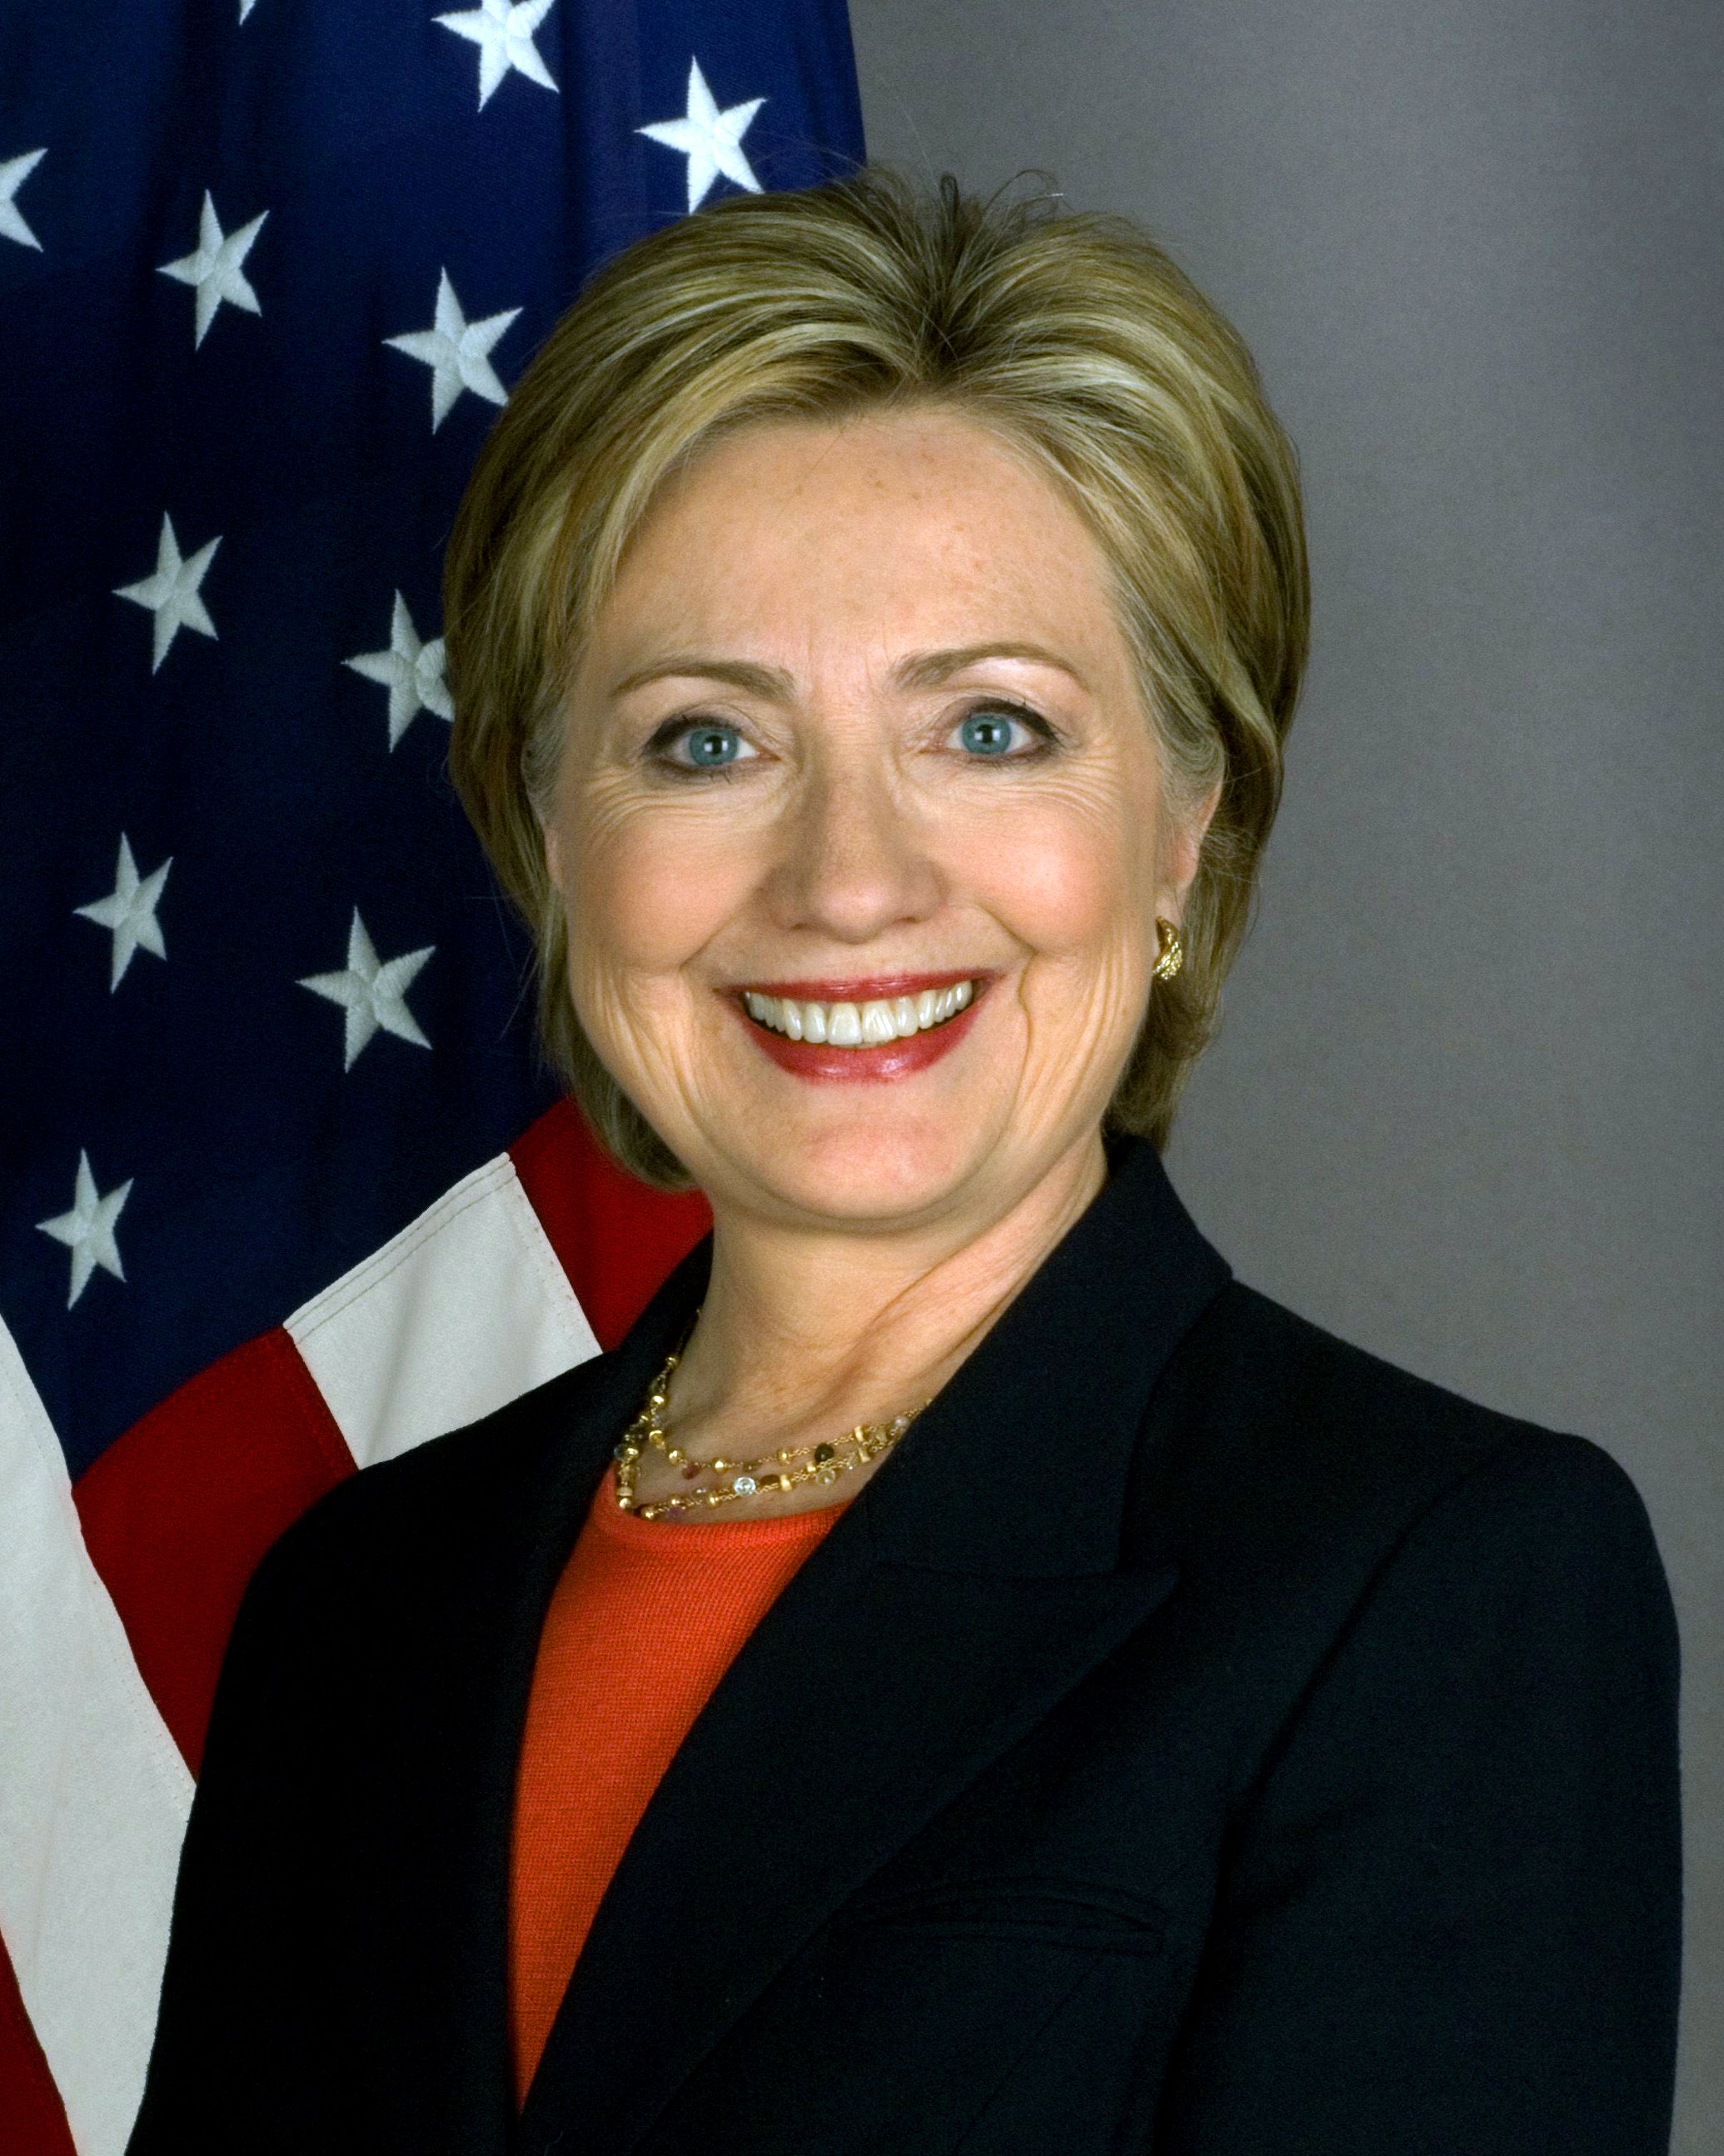 "Hillary Clinton official Secretary of State portrait crop" by United States Department of State - Official Photo at Department of State page. Licensed under Public Domain via Commons 